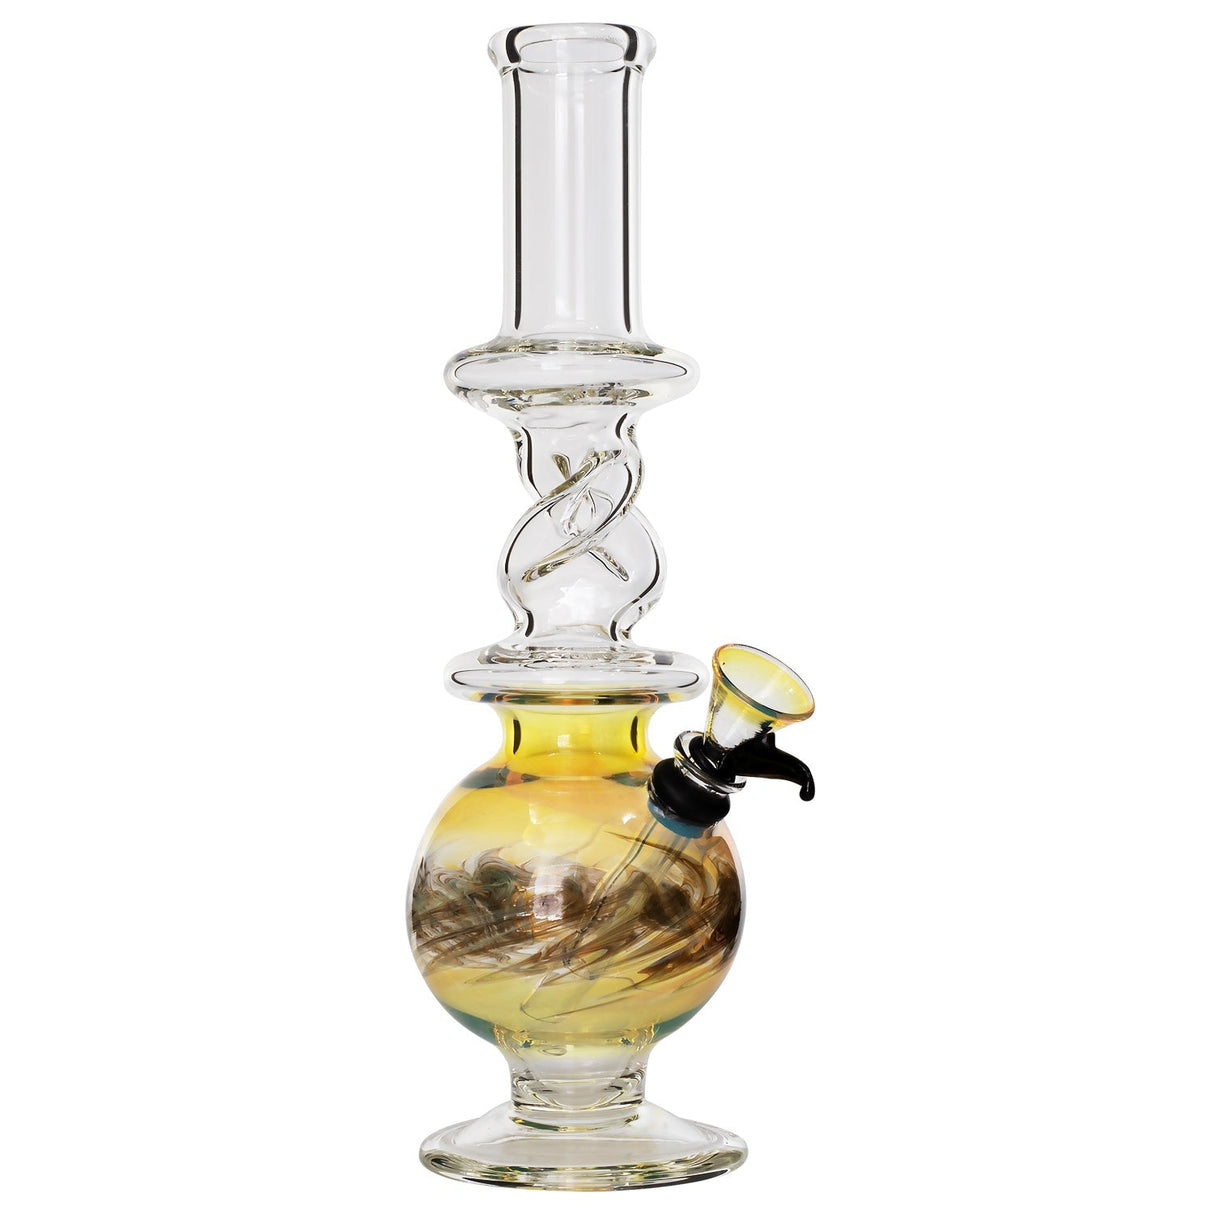 LA Pipes "The Typhoon Twister" Glass Bong (Various Colors)